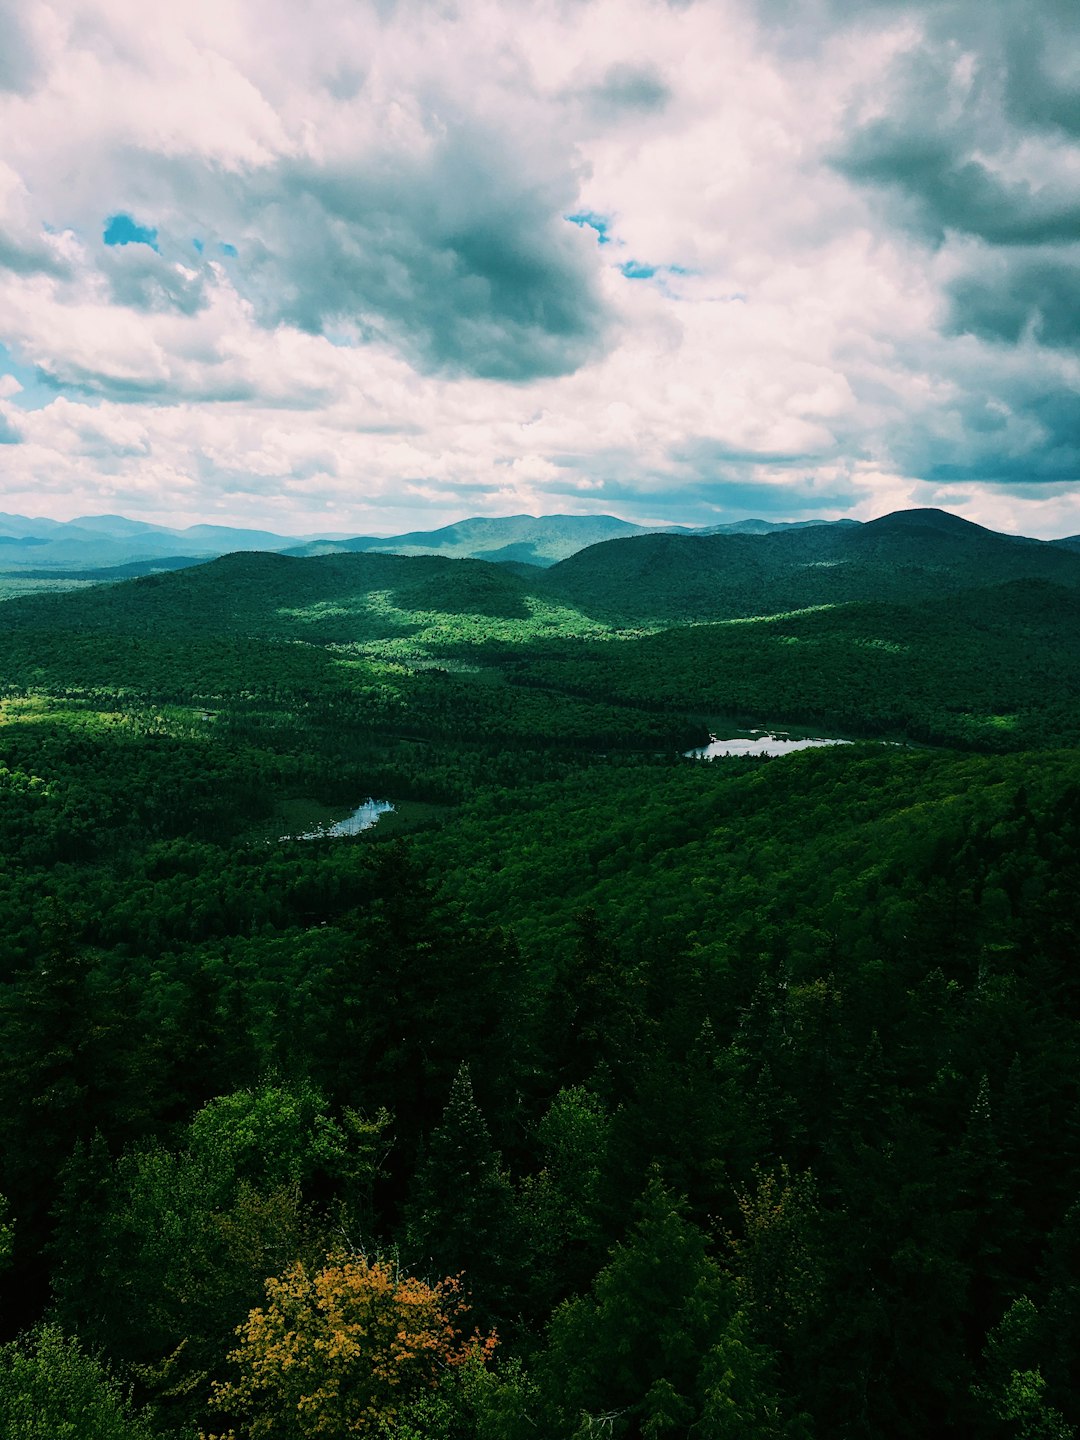 Travel Tips and Stories of Adirondack Park in United States